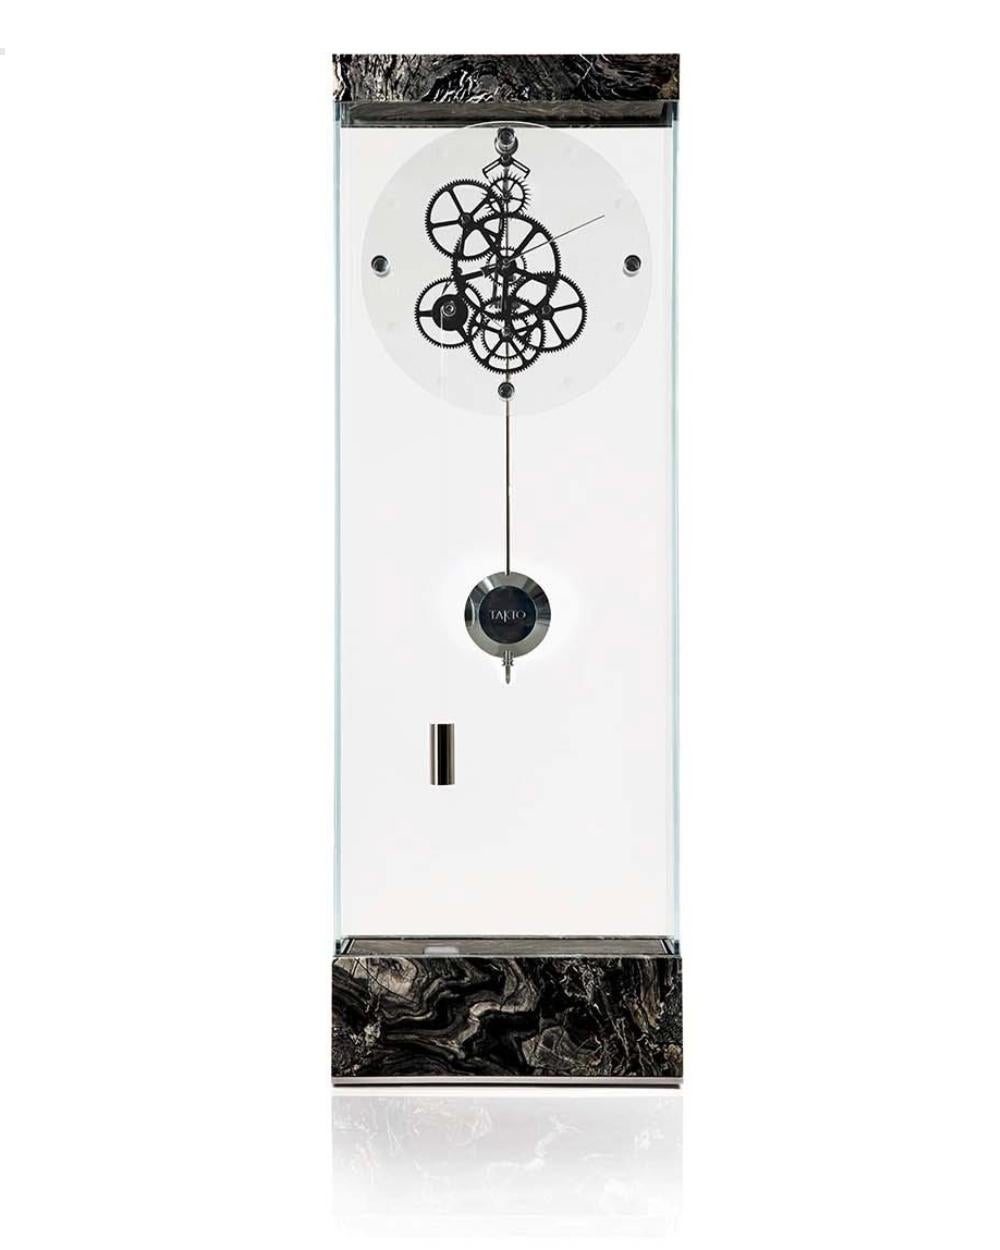 Teckell ADAGIO pendulum clock in Covelano White marble by Gianfranco Barban In New Condition For Sale In Brooklyn, NY